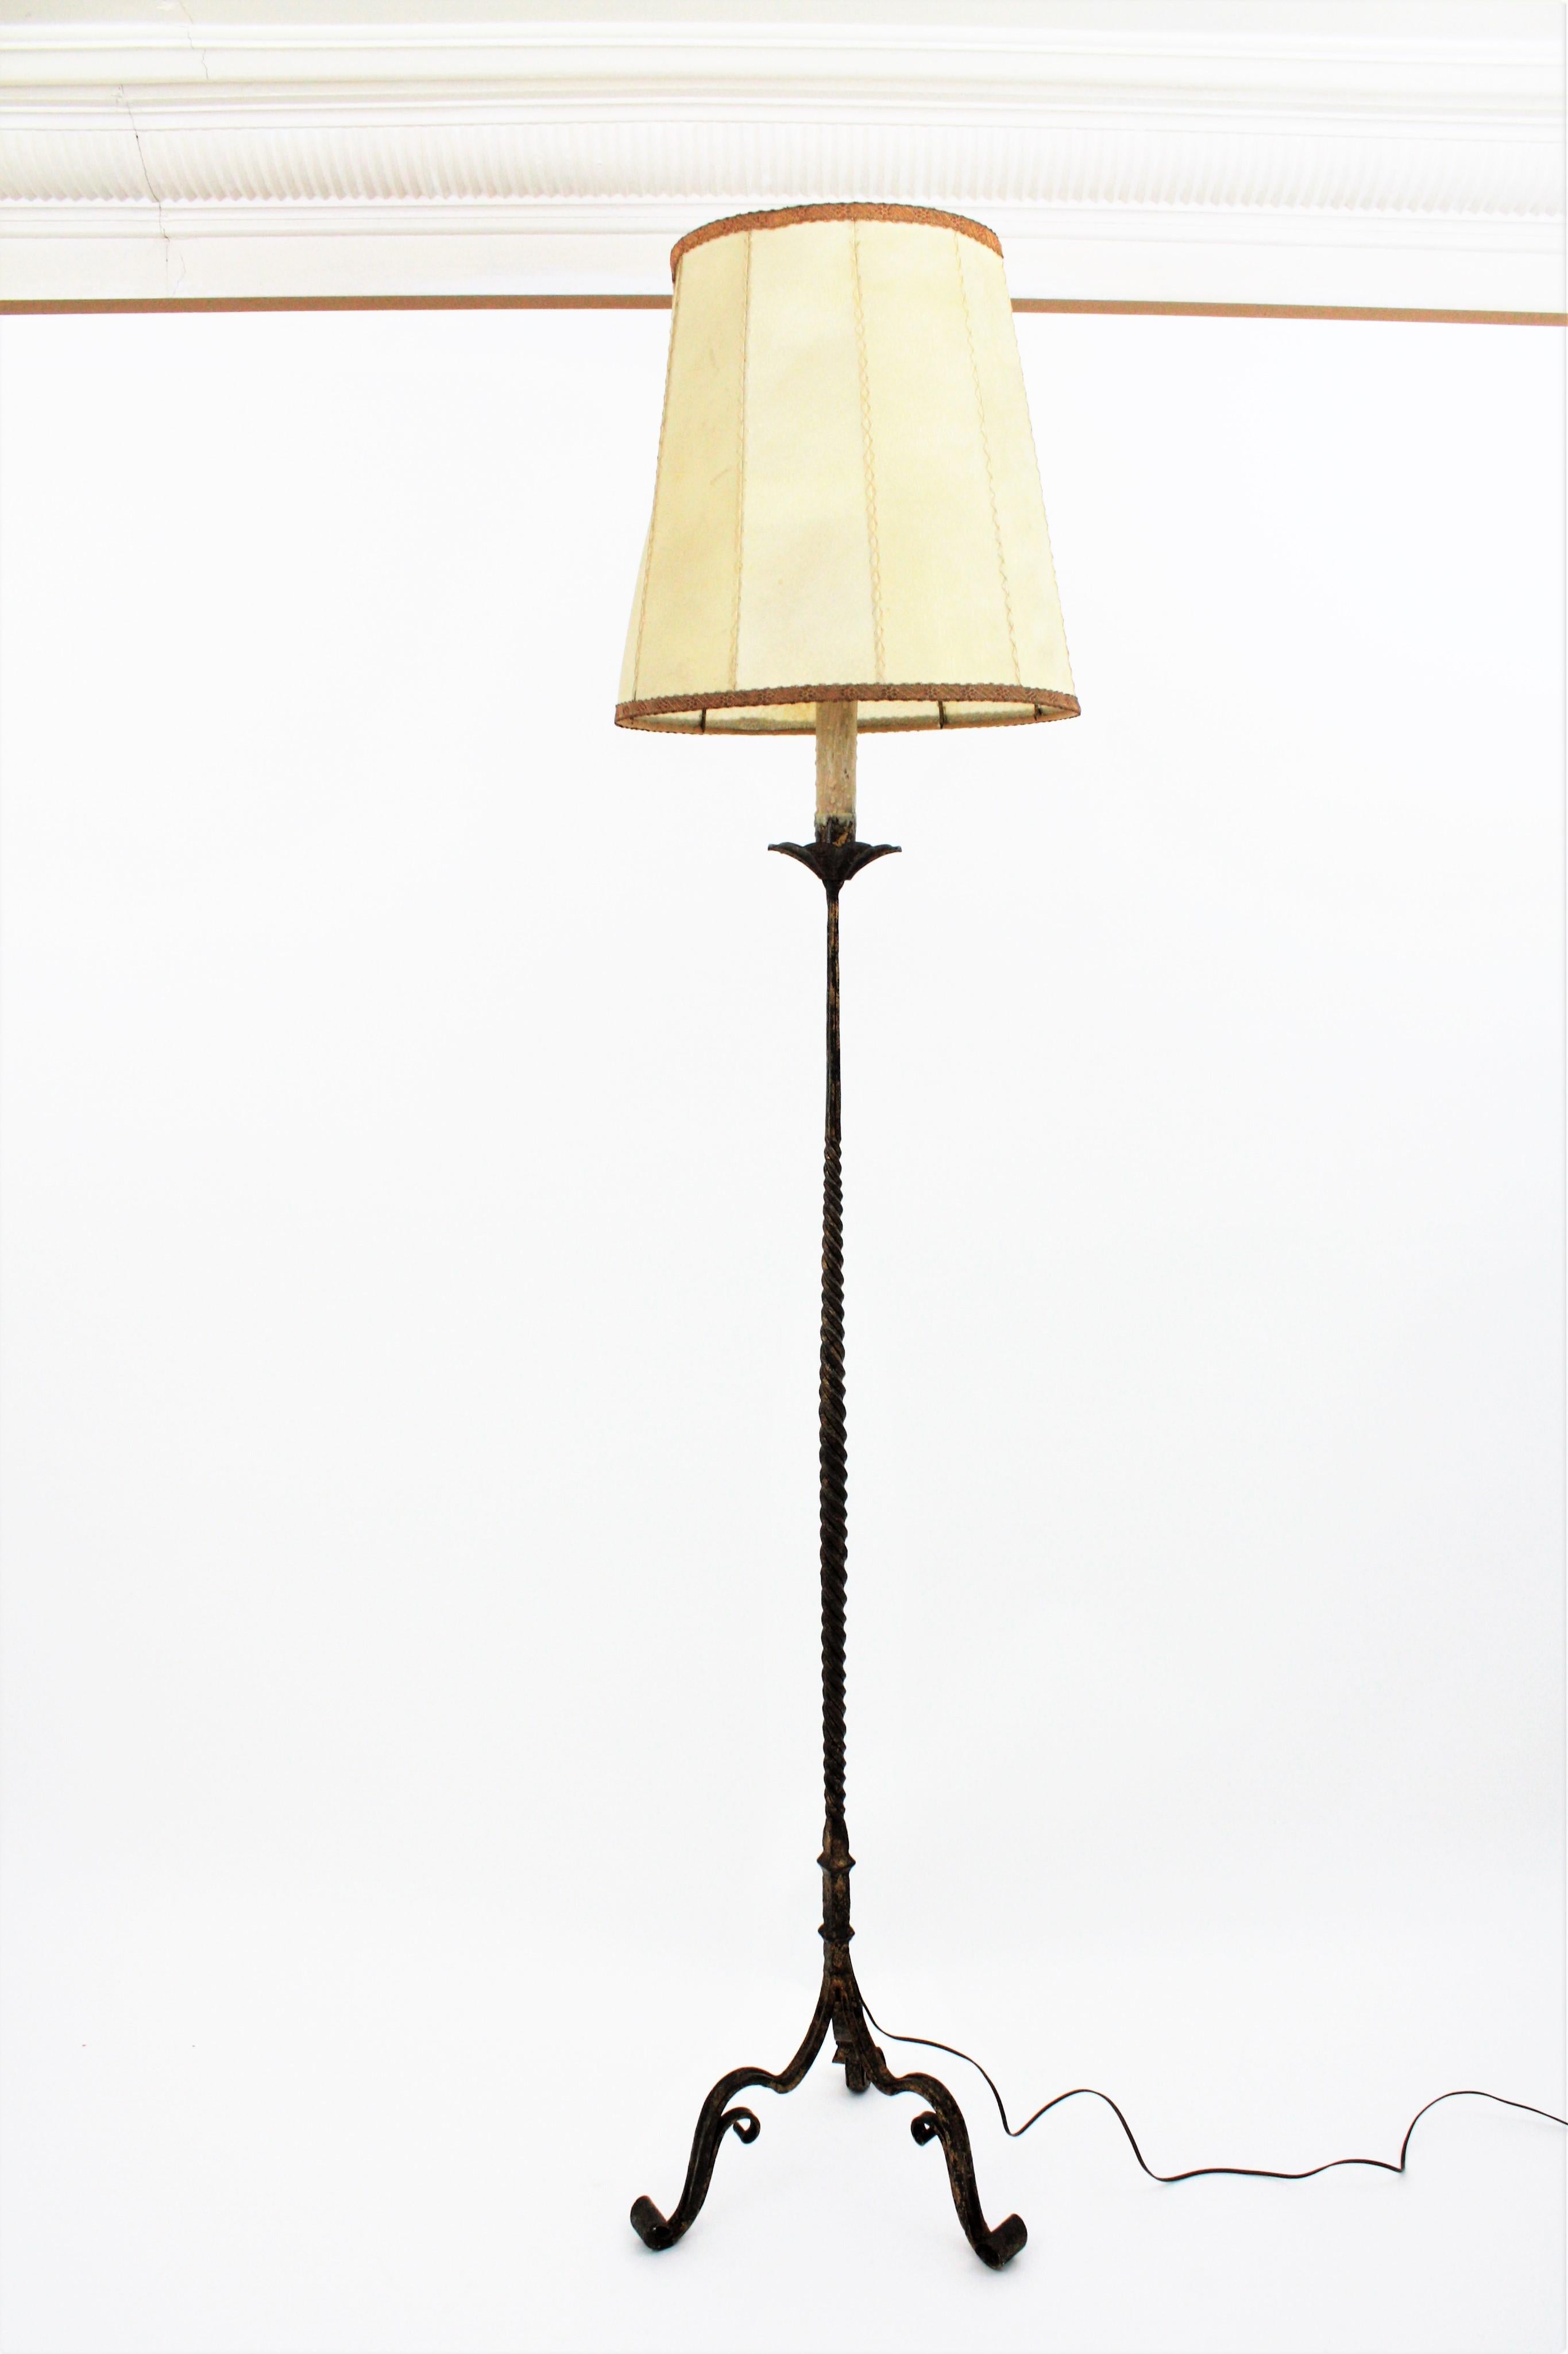 Hand-hammered gilt iron standing lamp with twisted stem with original vellum shade raised on a tripod base, Spain, 1930s-1940s.
Stylish Gothic accents, nice distressed aged patina retaining rests of gold leaf gilt finish.
On sale with its antique